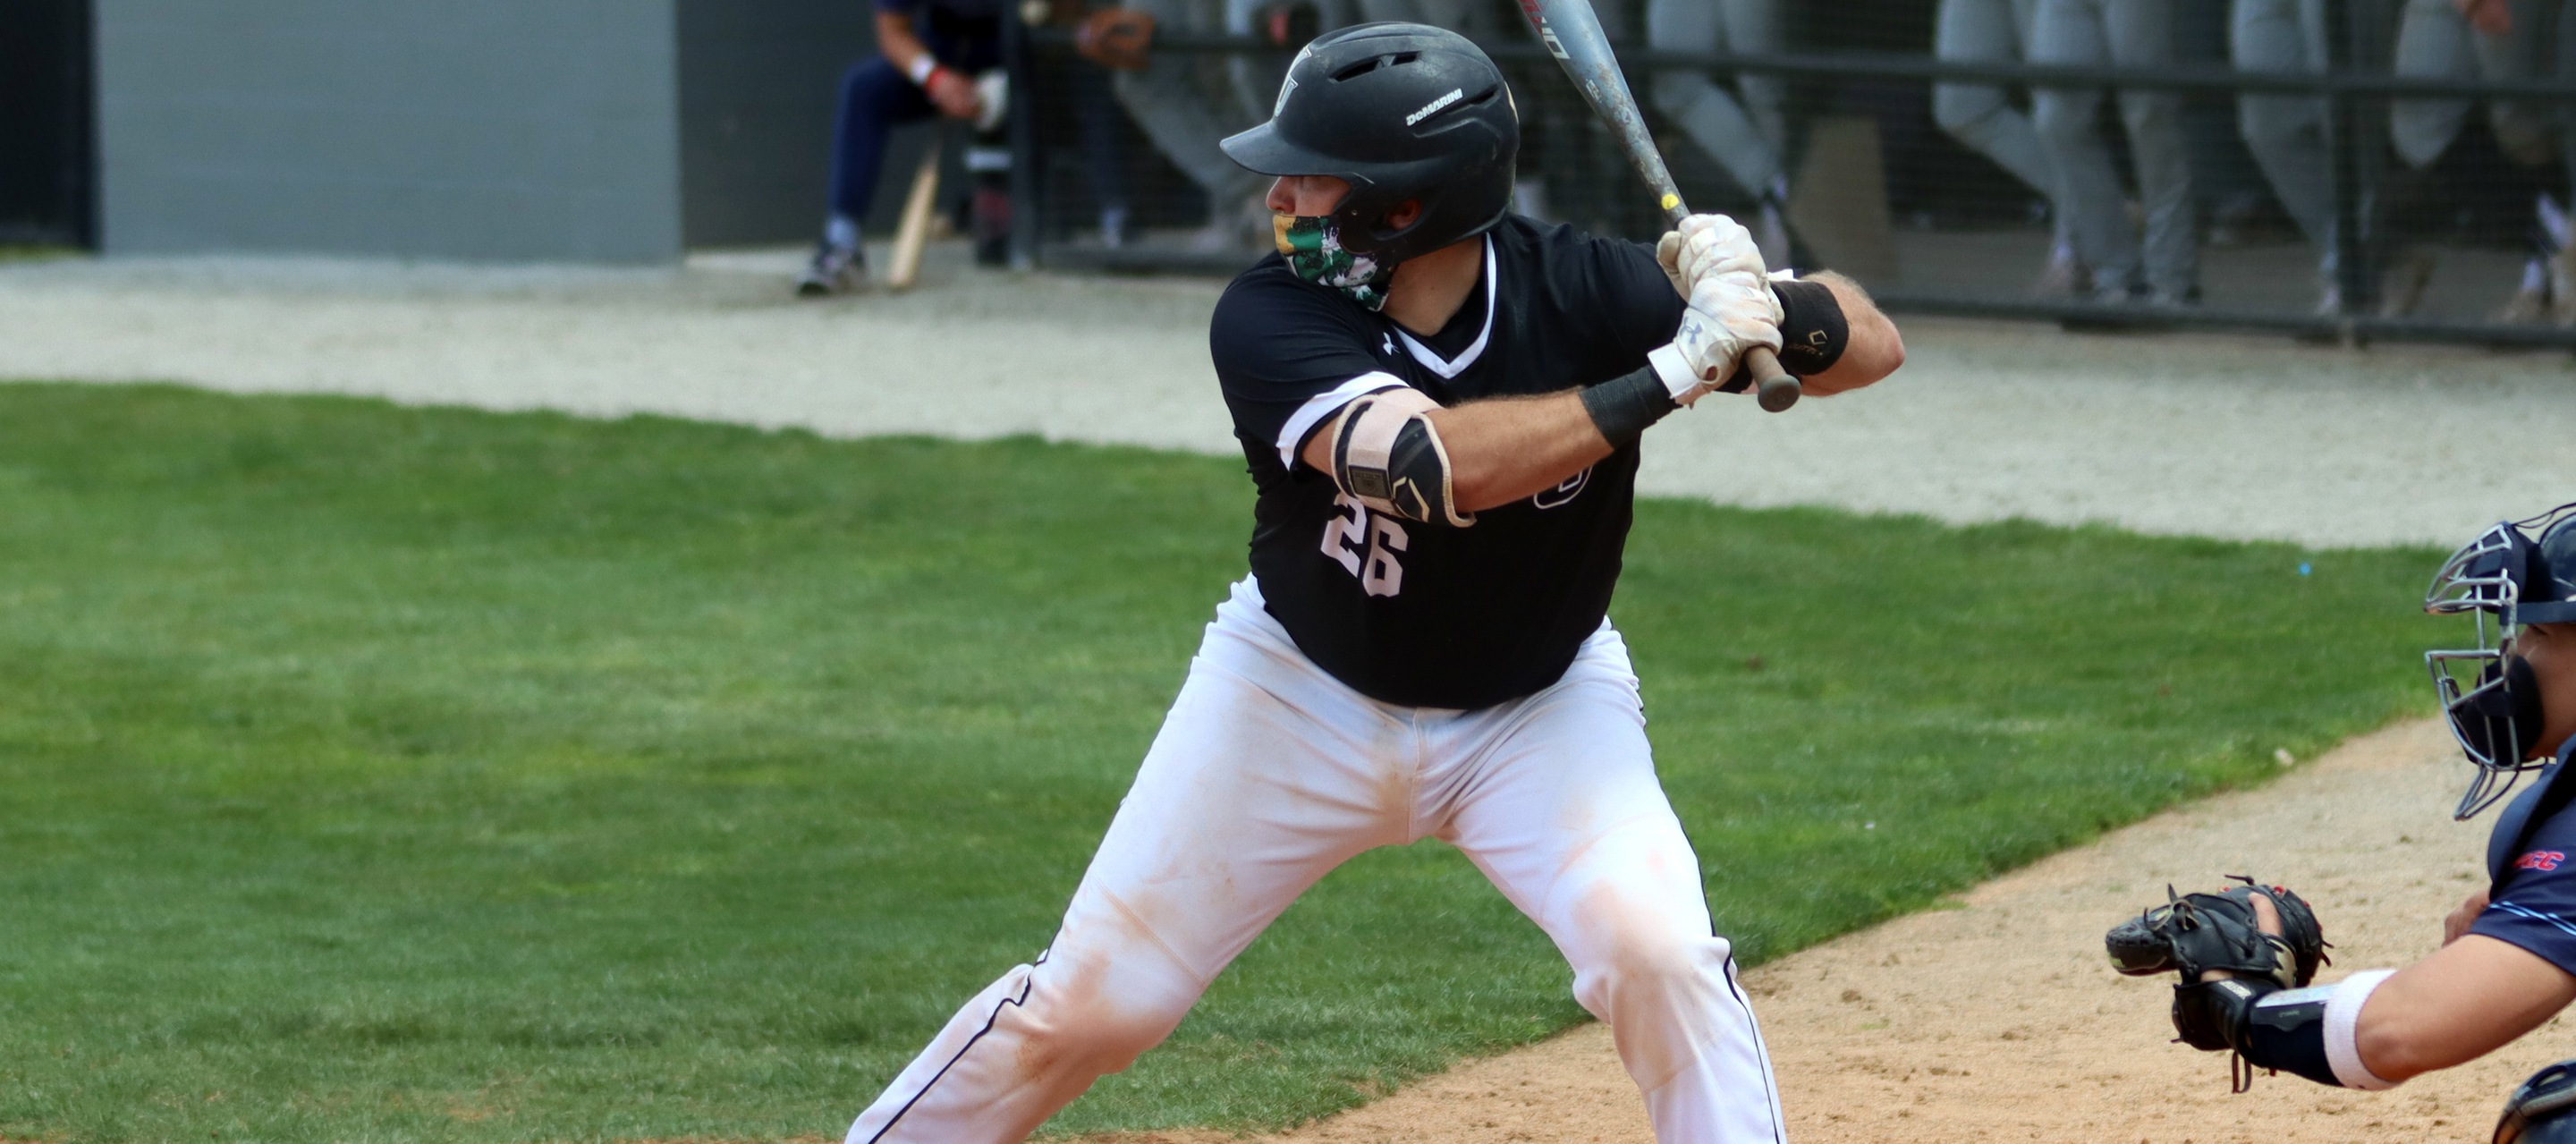 File photo of Brock Nowell who batted 2-for-5 with a run scored at Chestnut Hill. Copyright 2021; Wilmington University. All rights reserved. Photo by Erin Harvey.